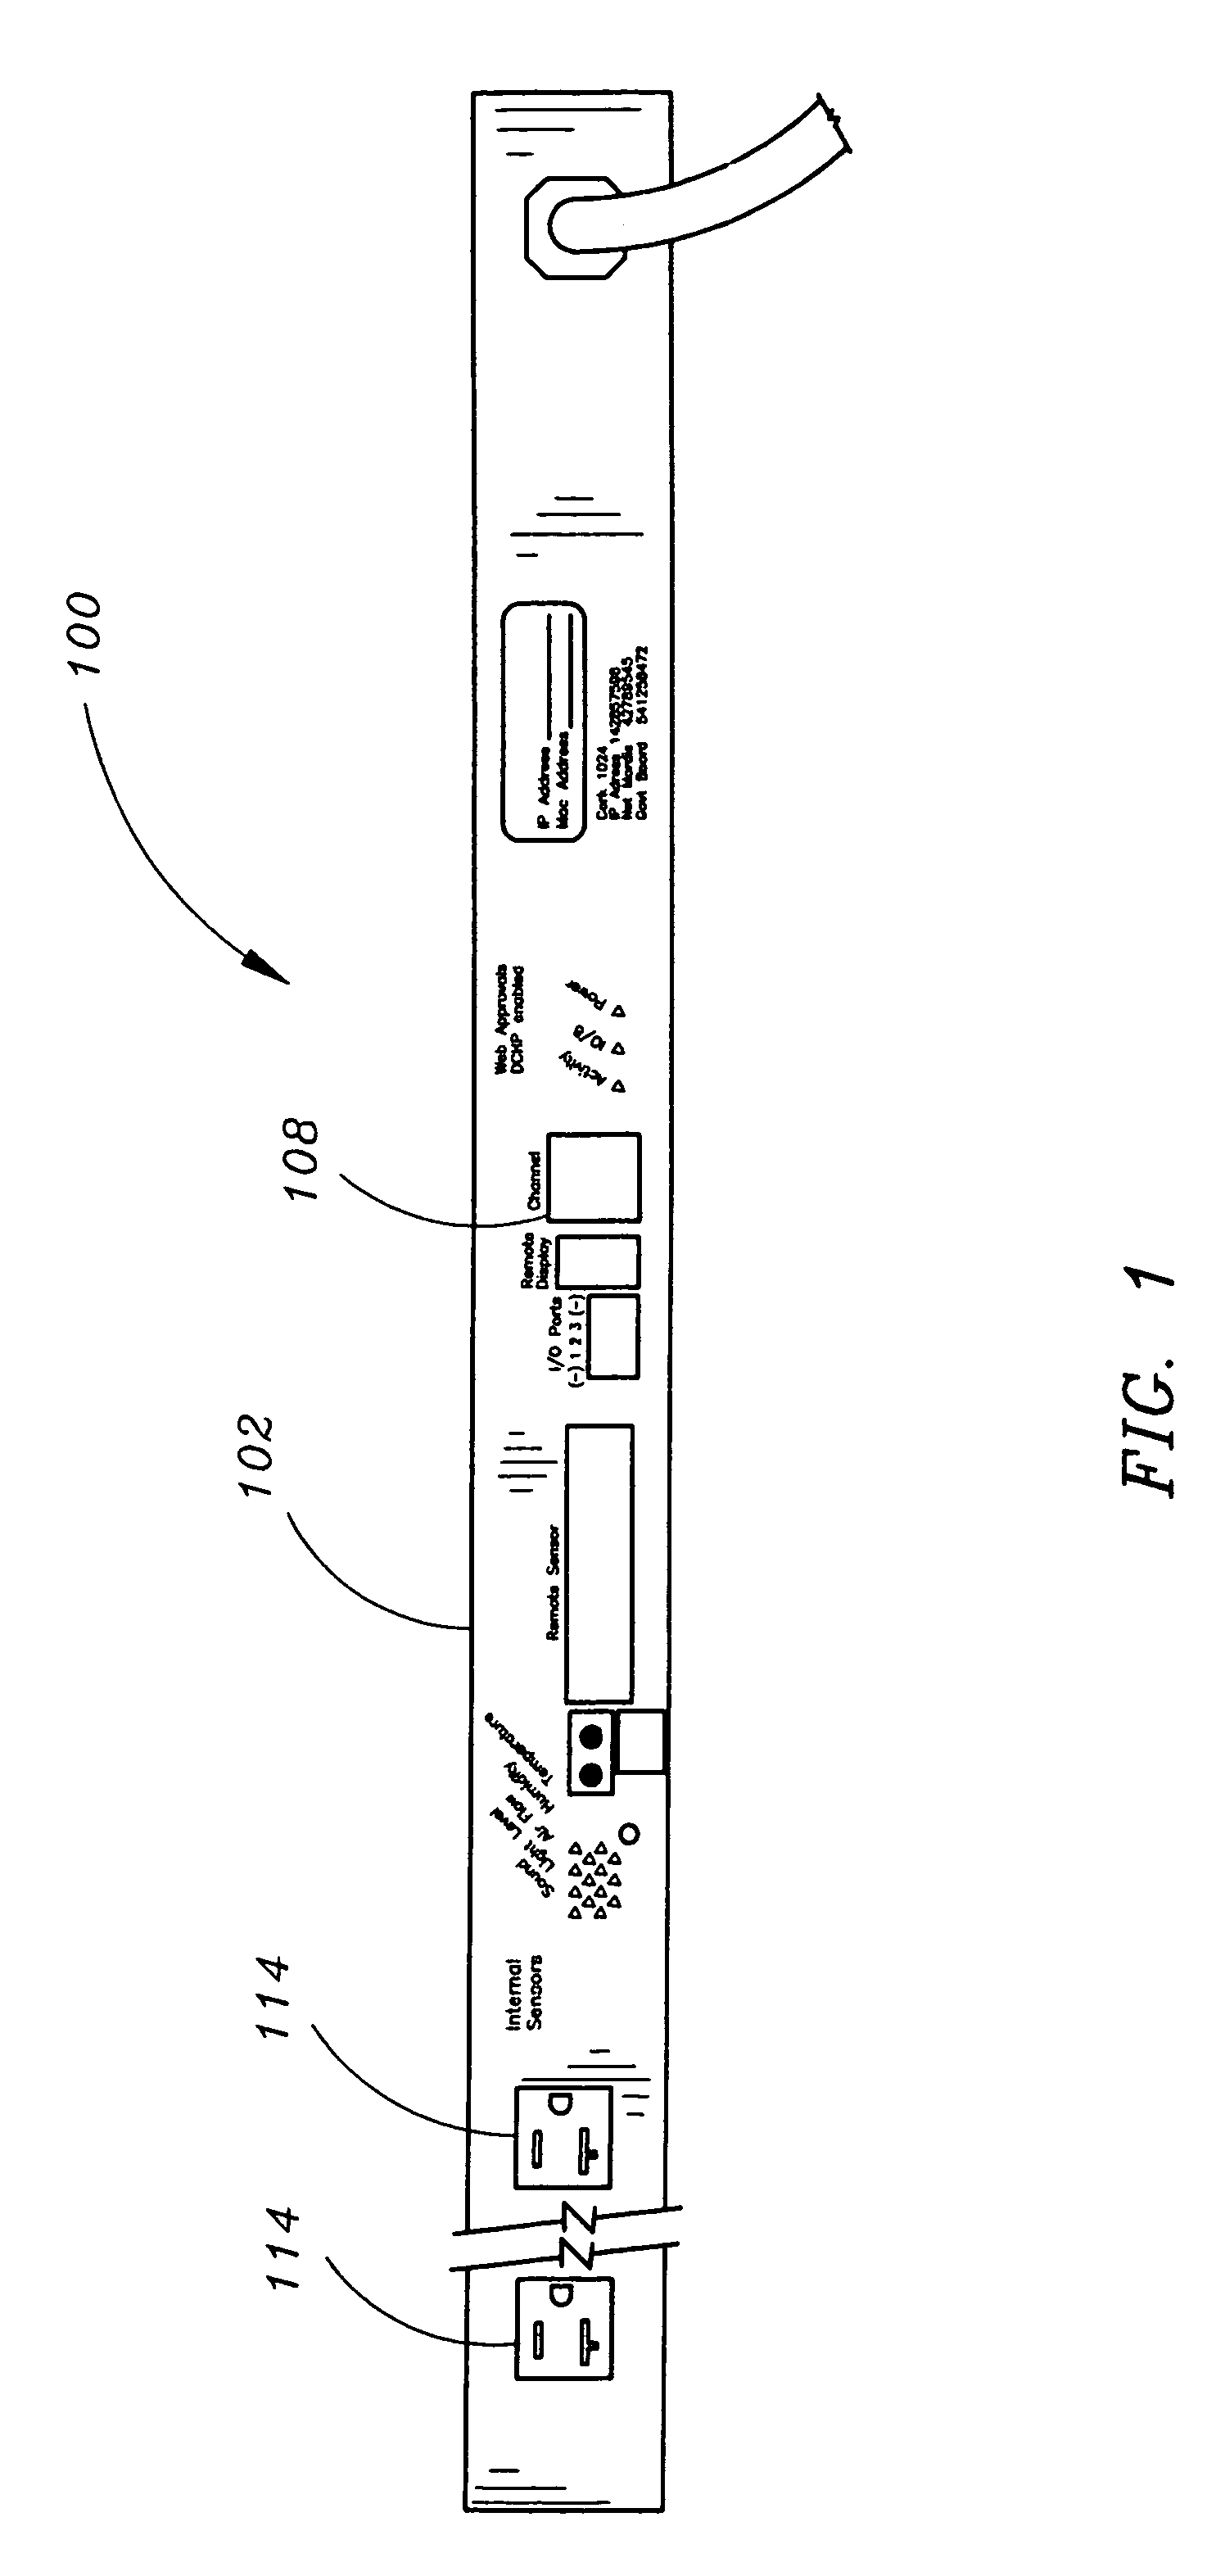 Integrated power and environmental monitoring electrical distribution system